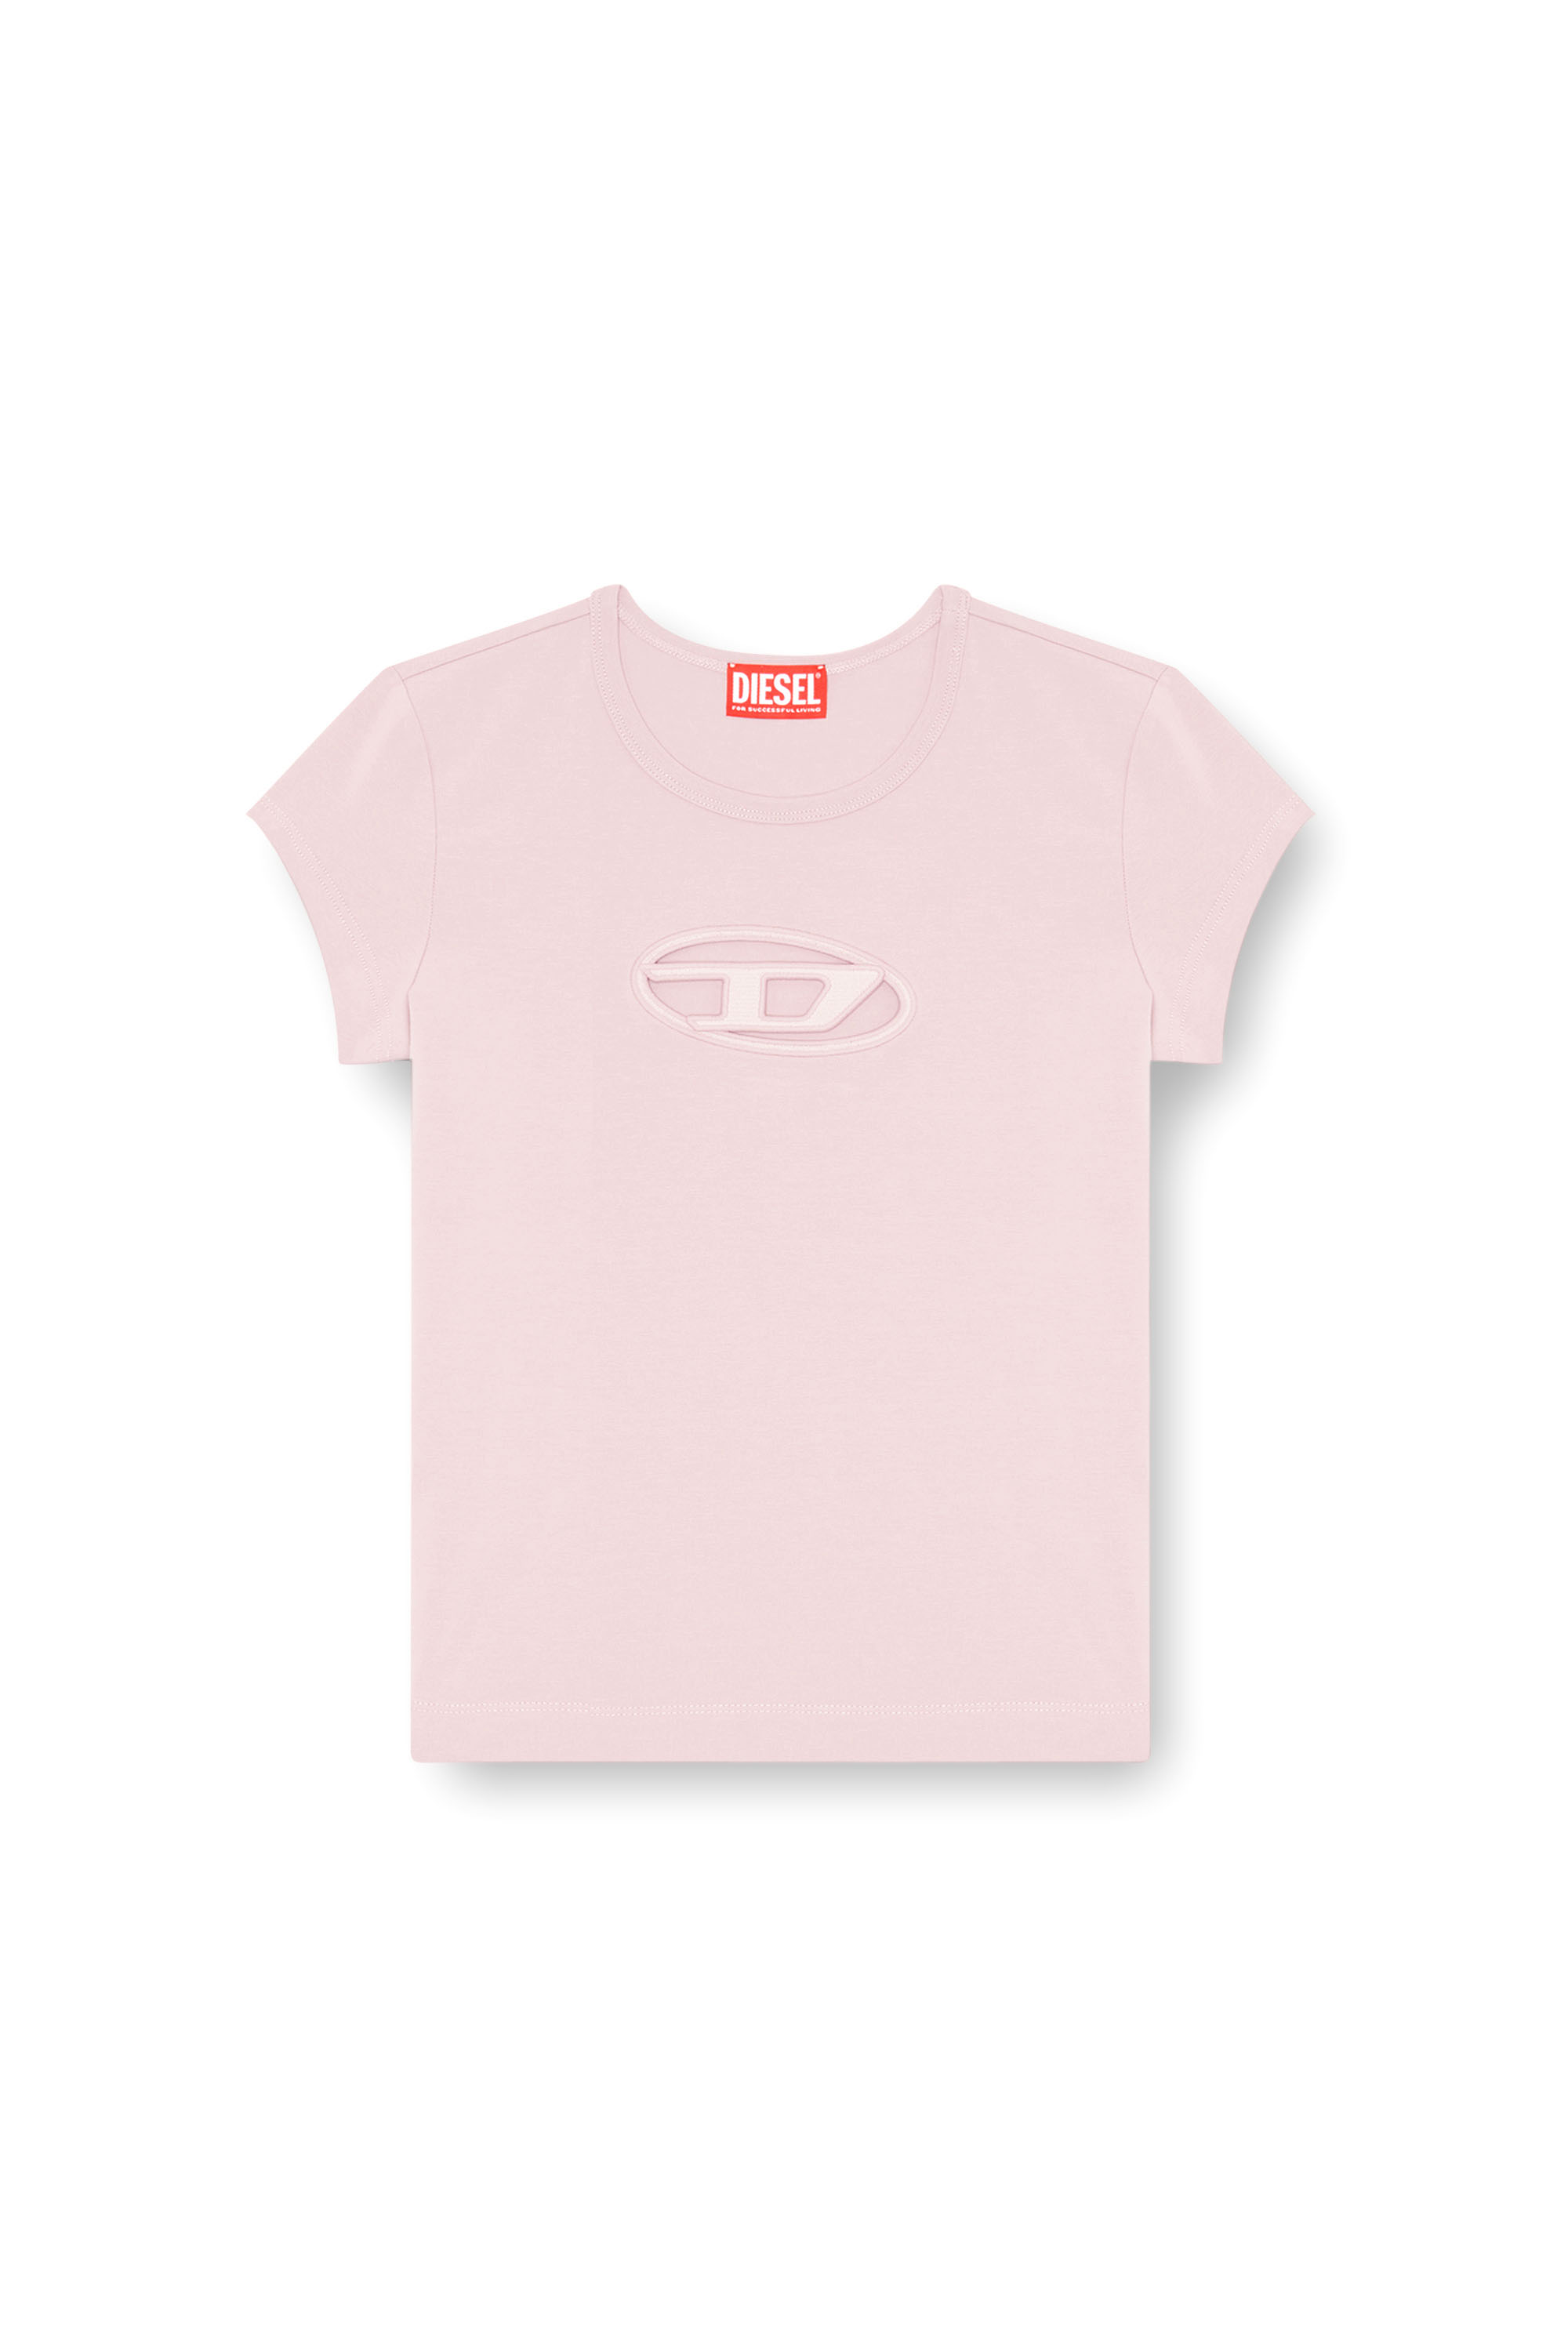 Diesel - T-ANGIE, Donna T-shirt con logo peekaboo in Rosa - Image 3